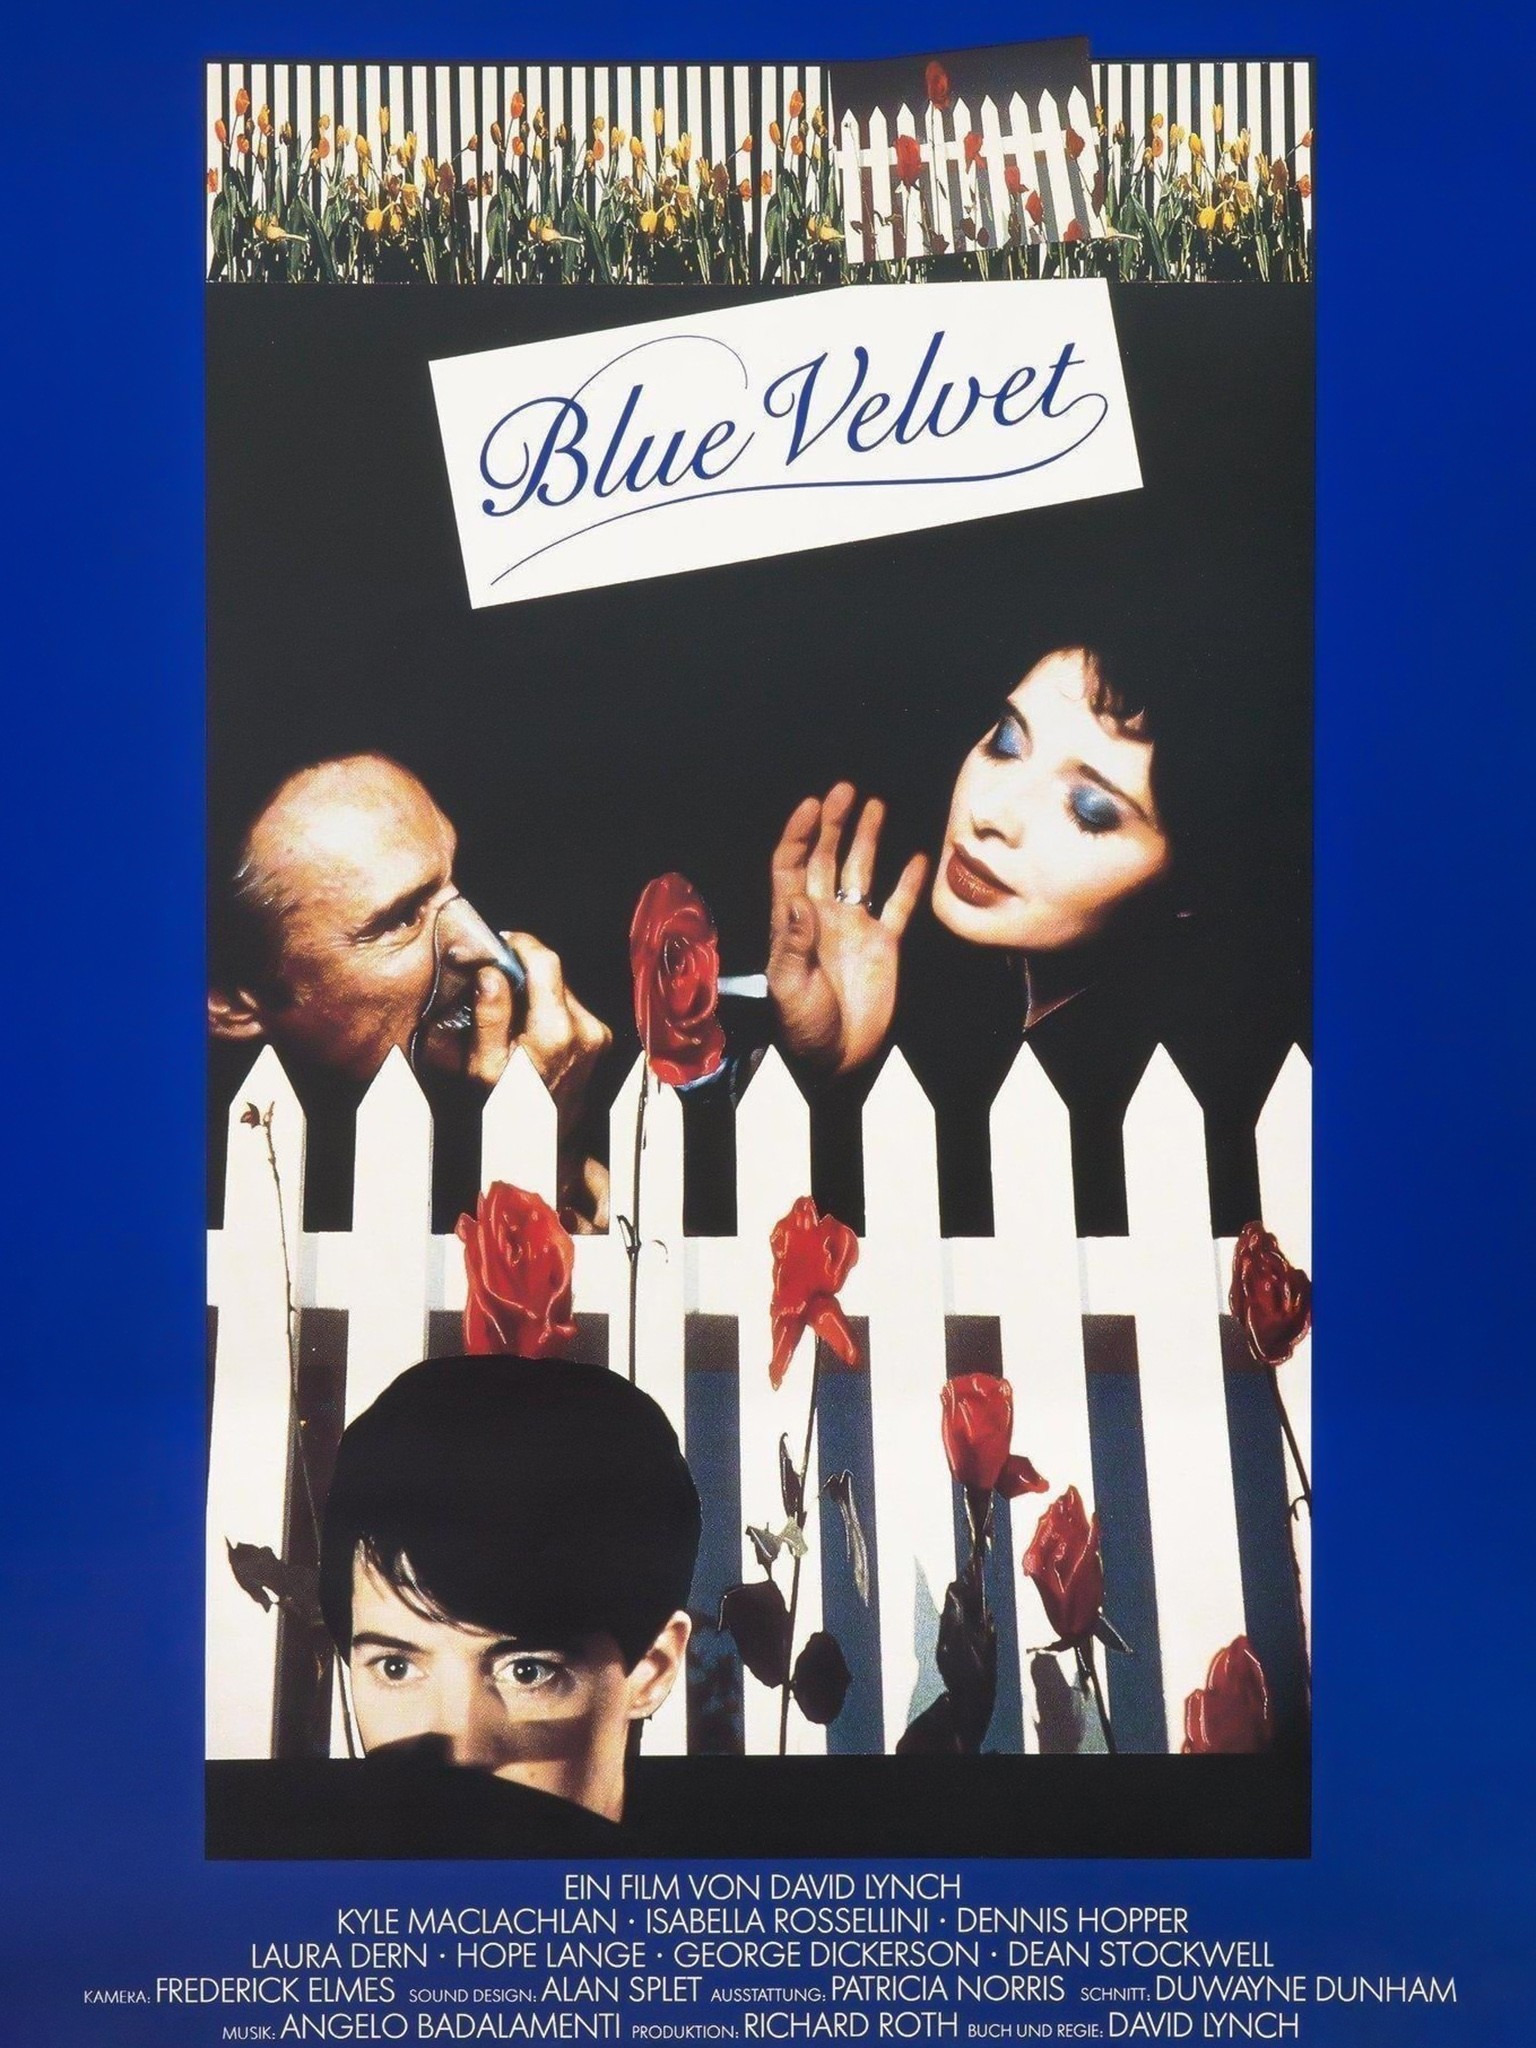 Notes About One Of The Last Scenes In Blue Velvet (SPOILERS